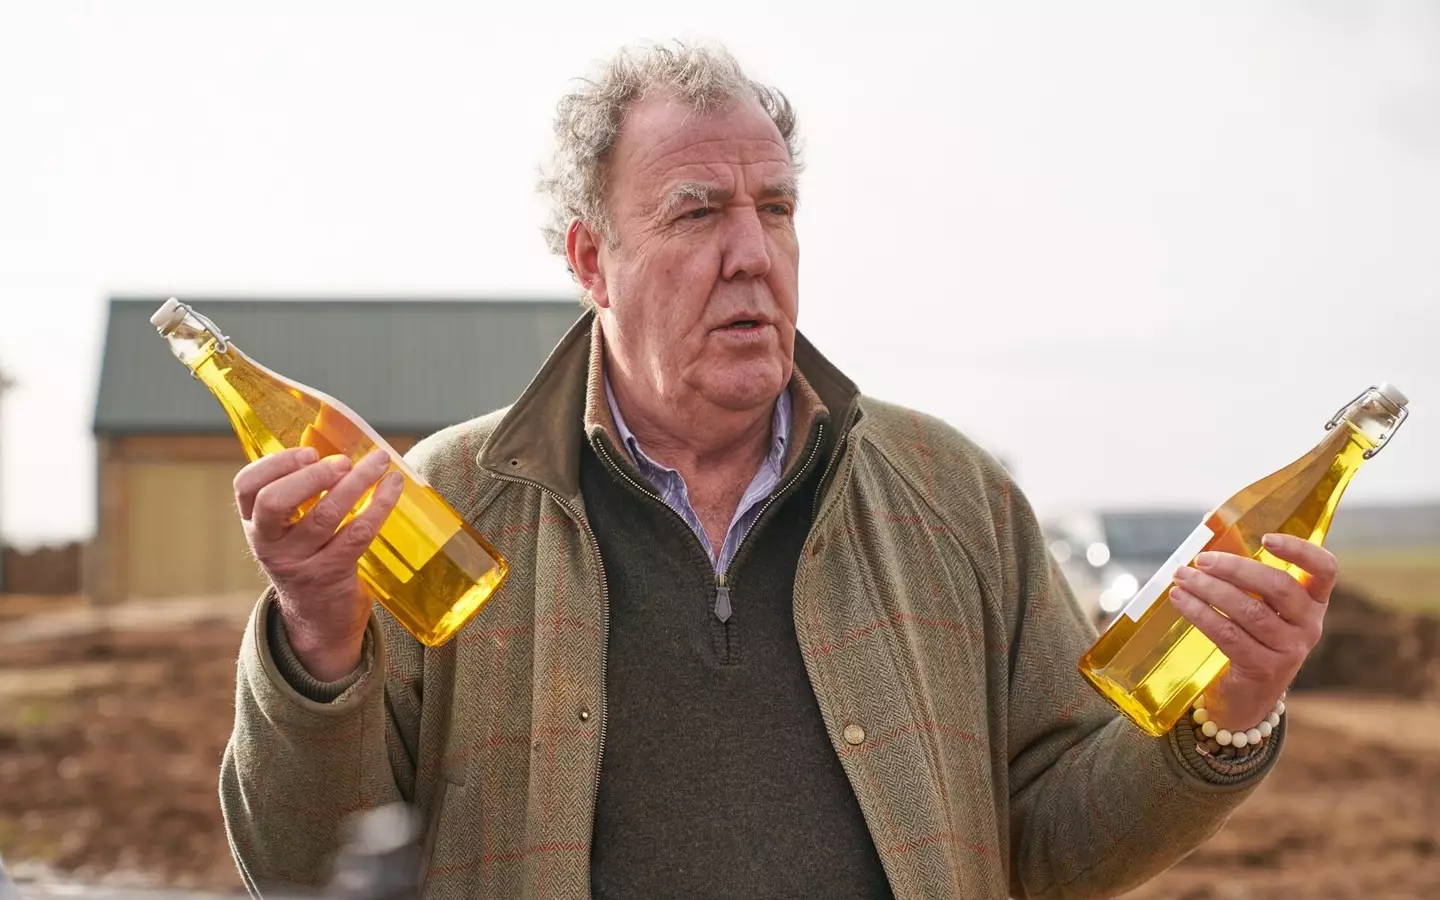 Clarkson with some of his non-explosive cider.